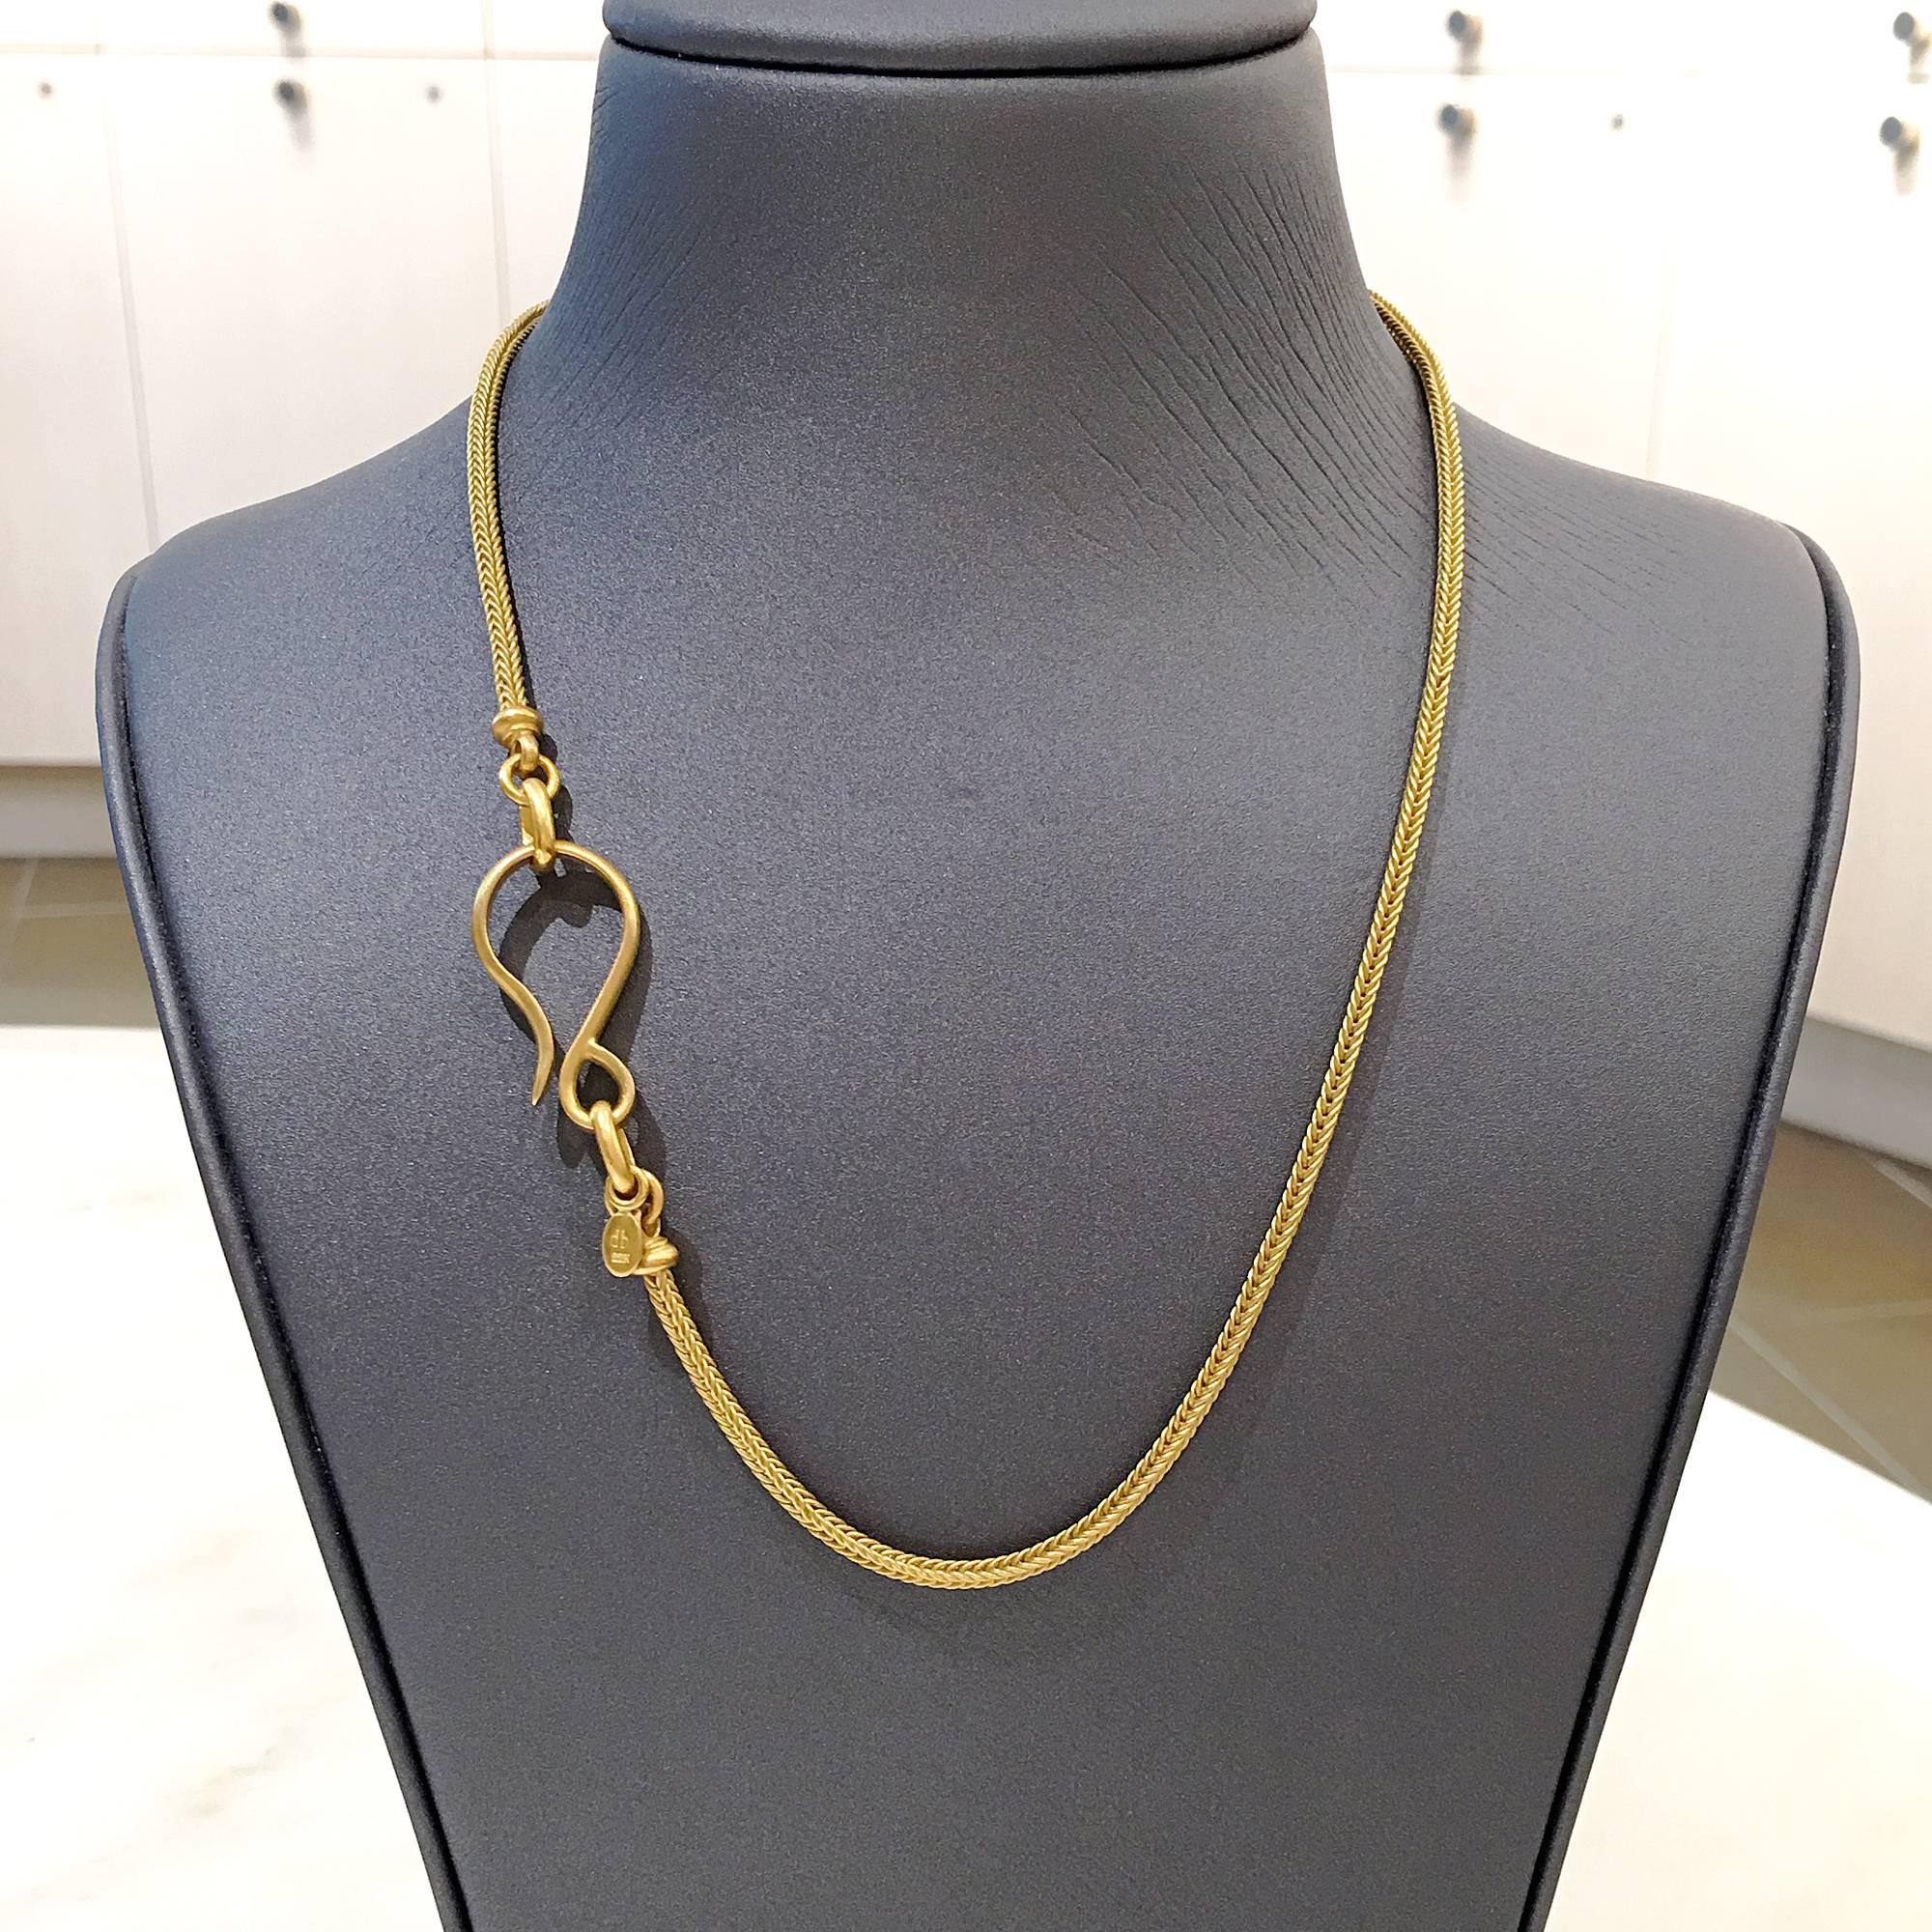 Intricate Handmade  Foxtail Chain by jewelry artist Denise Betesh showcasing the artist's signature-finished 22k yellow gold and a 1 inch ornamental hook clasp. A dangling oval coin features the designer's 'db' hallmark and 22k stamp. 18 inch in